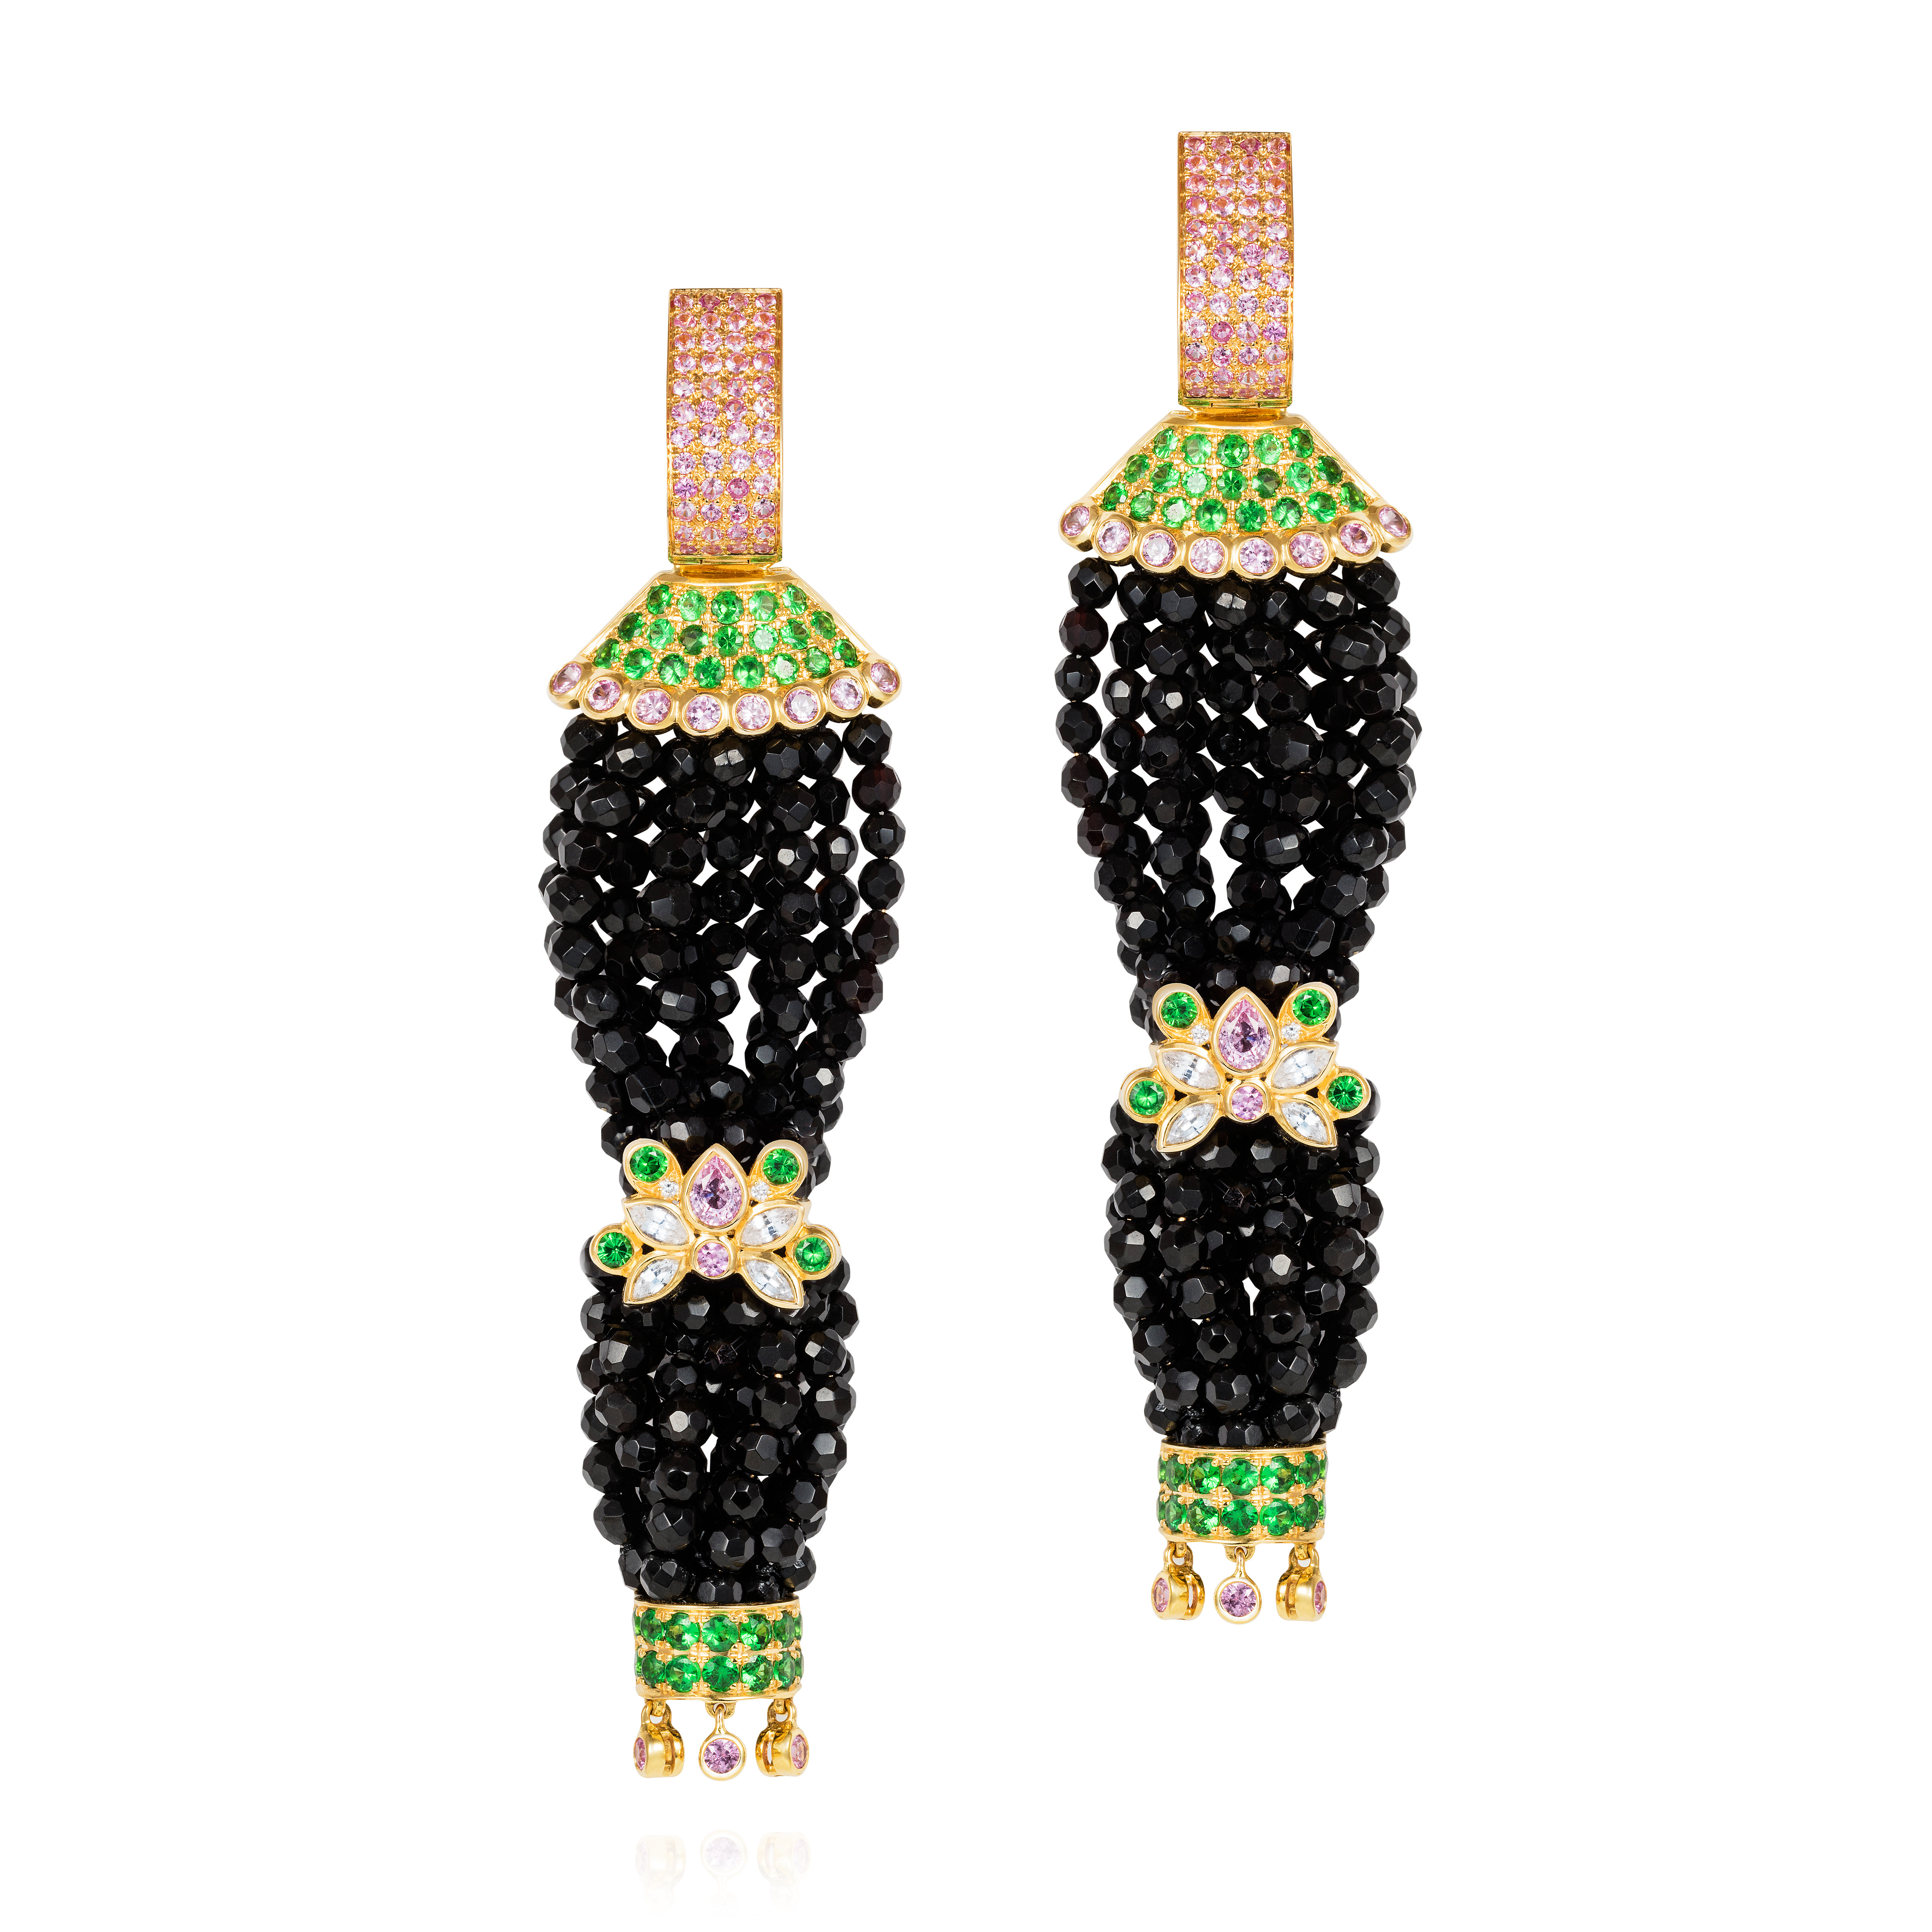 Pagoda Earrings – Pink Sapphires, Tsavorite Garnets, White Sapphires And Diamonds On Faceted Onyx Beads 18k Gold